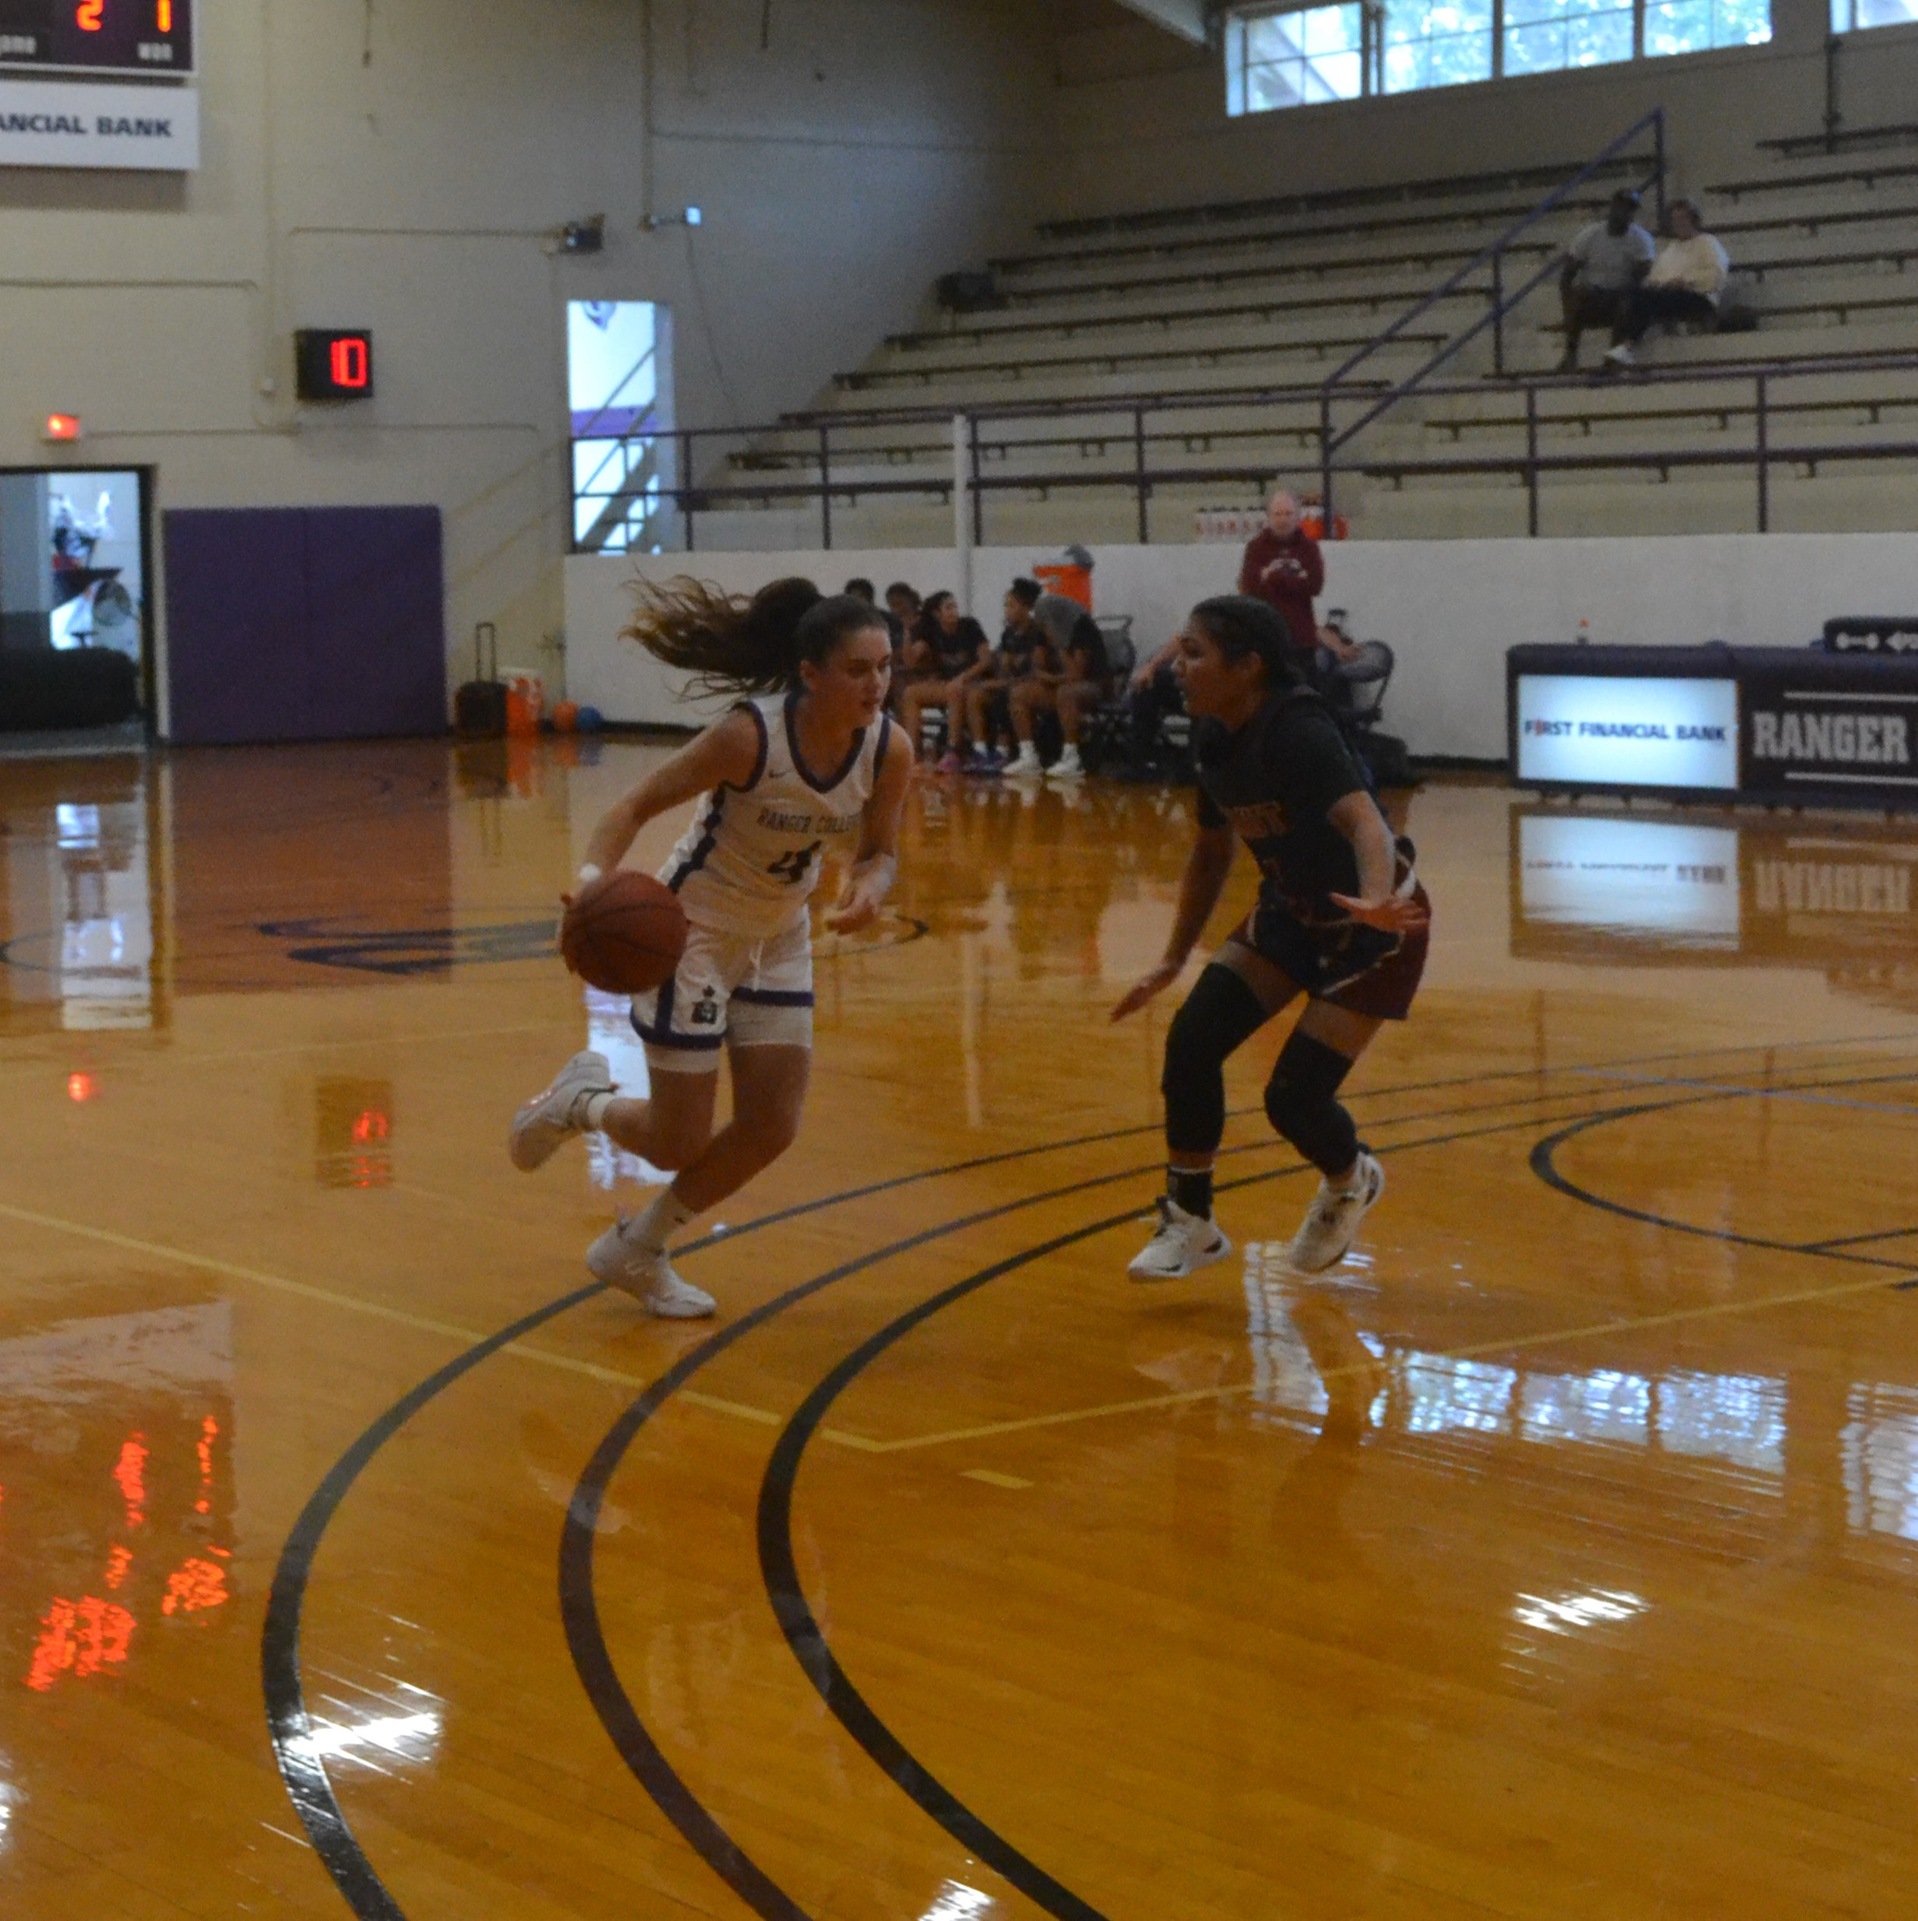 Ranger College Women's Basketball loses at home to Hill College 59-42